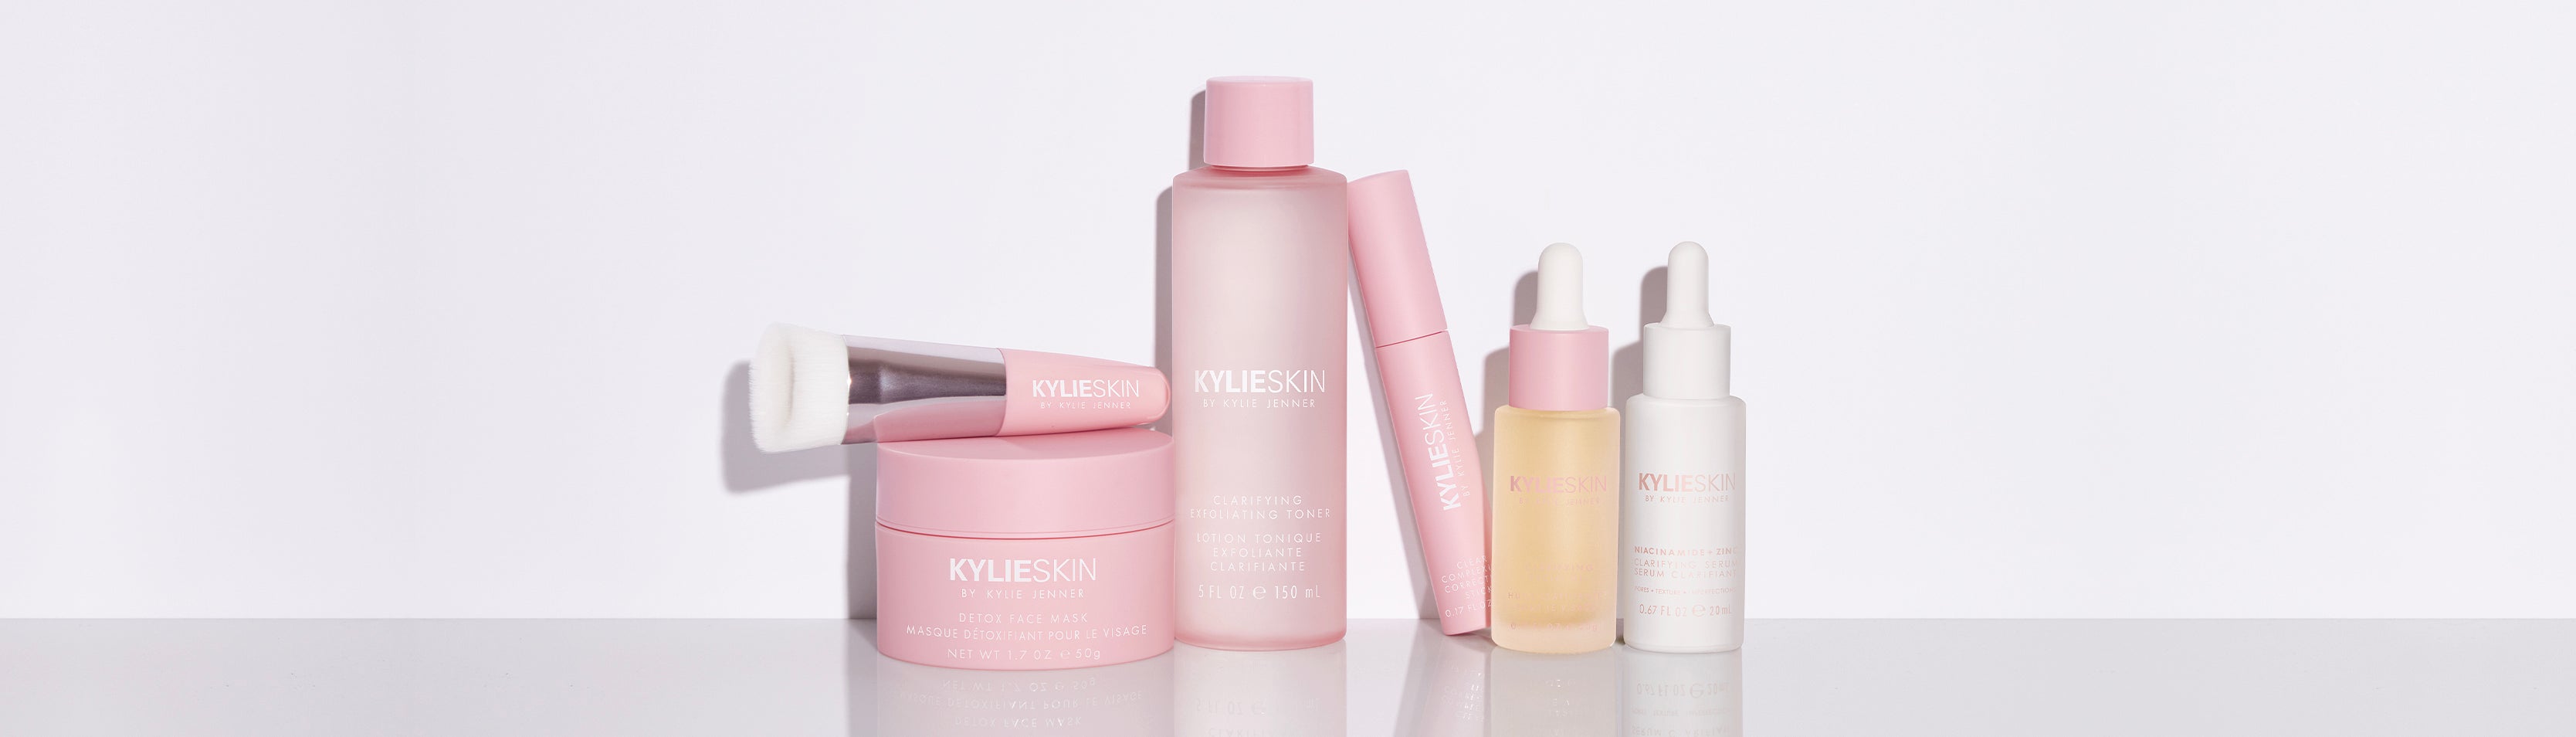 Kylie Skin - Featured - Clear & Clarify